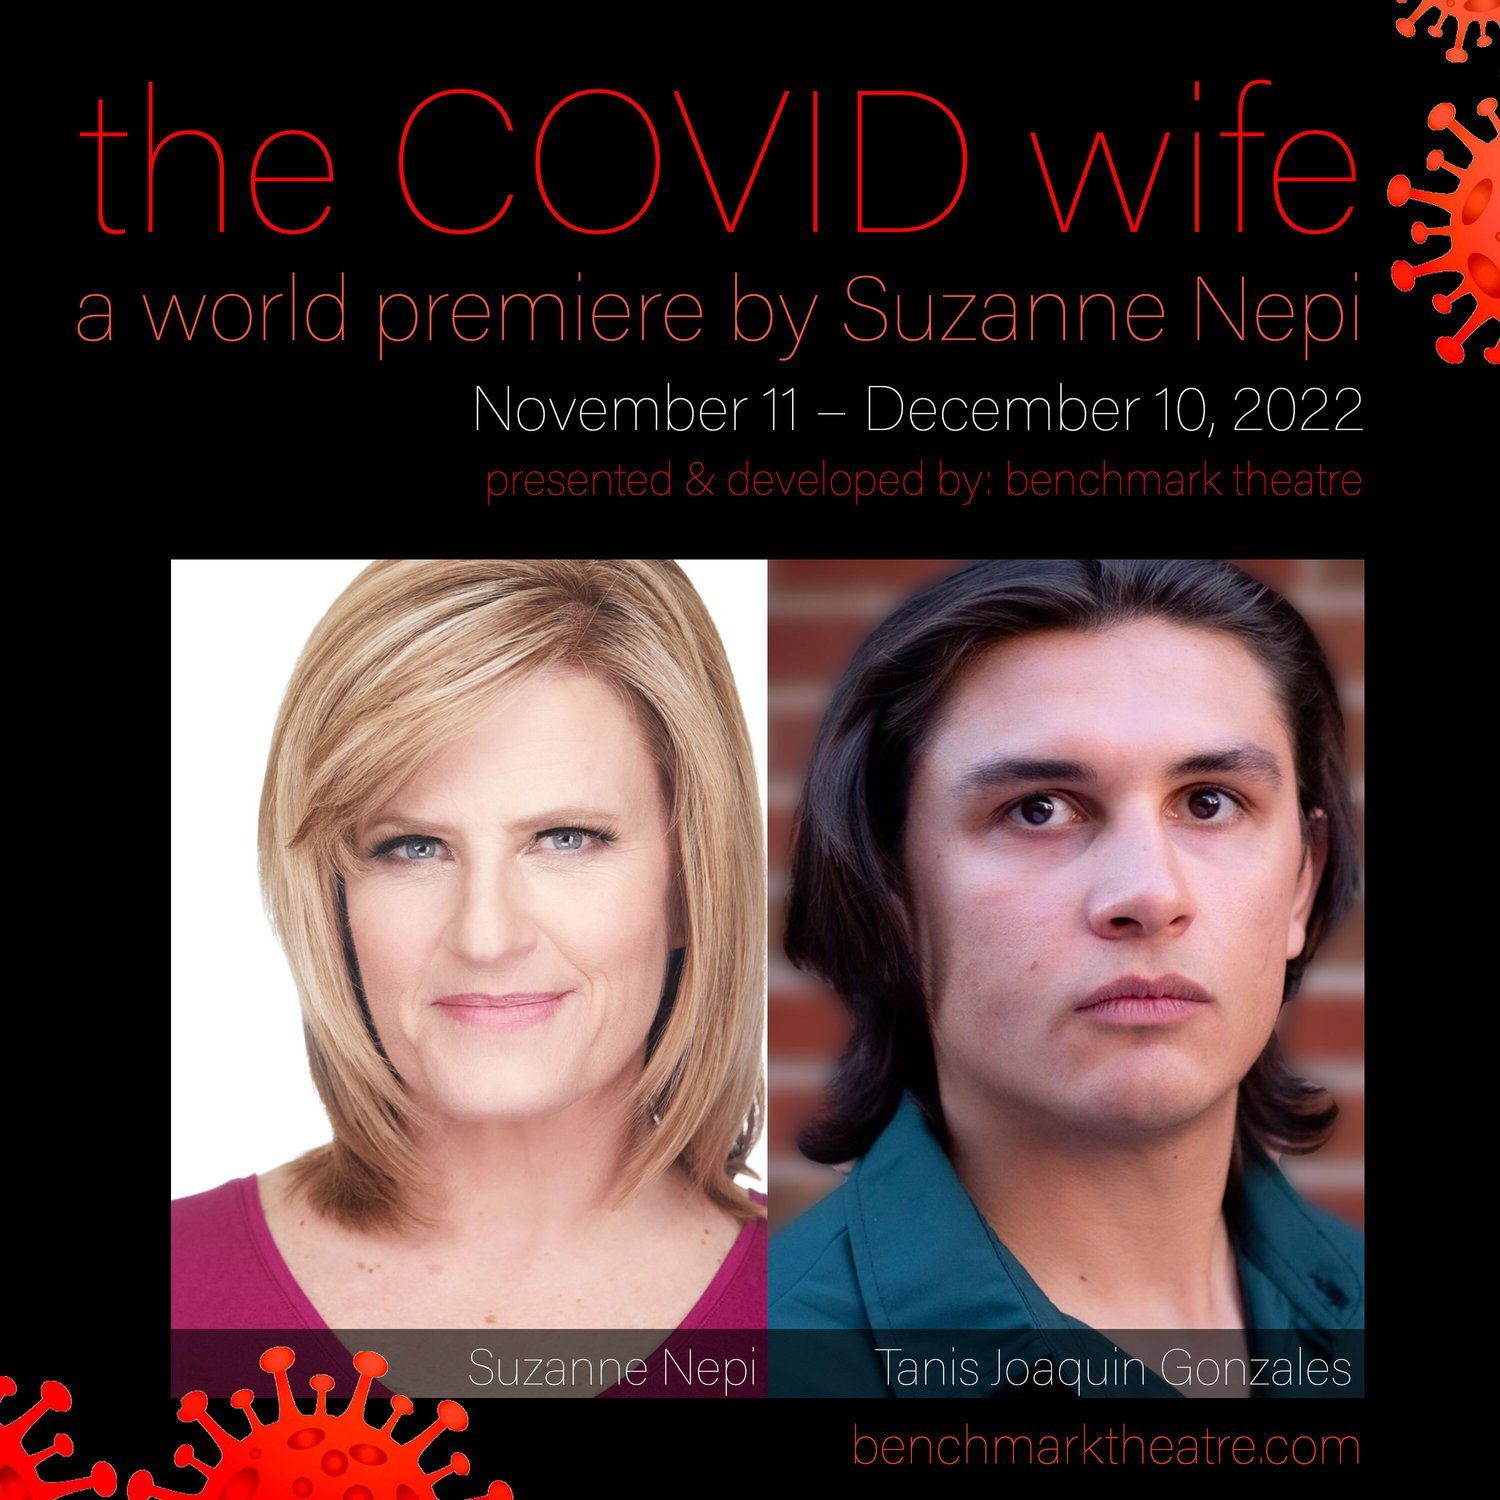 The COVID Wife, written by Suzanne Nepi and directed by Neil Truglio premieres on Nov. 11 at the Benchmark Theatre in Lakewood.